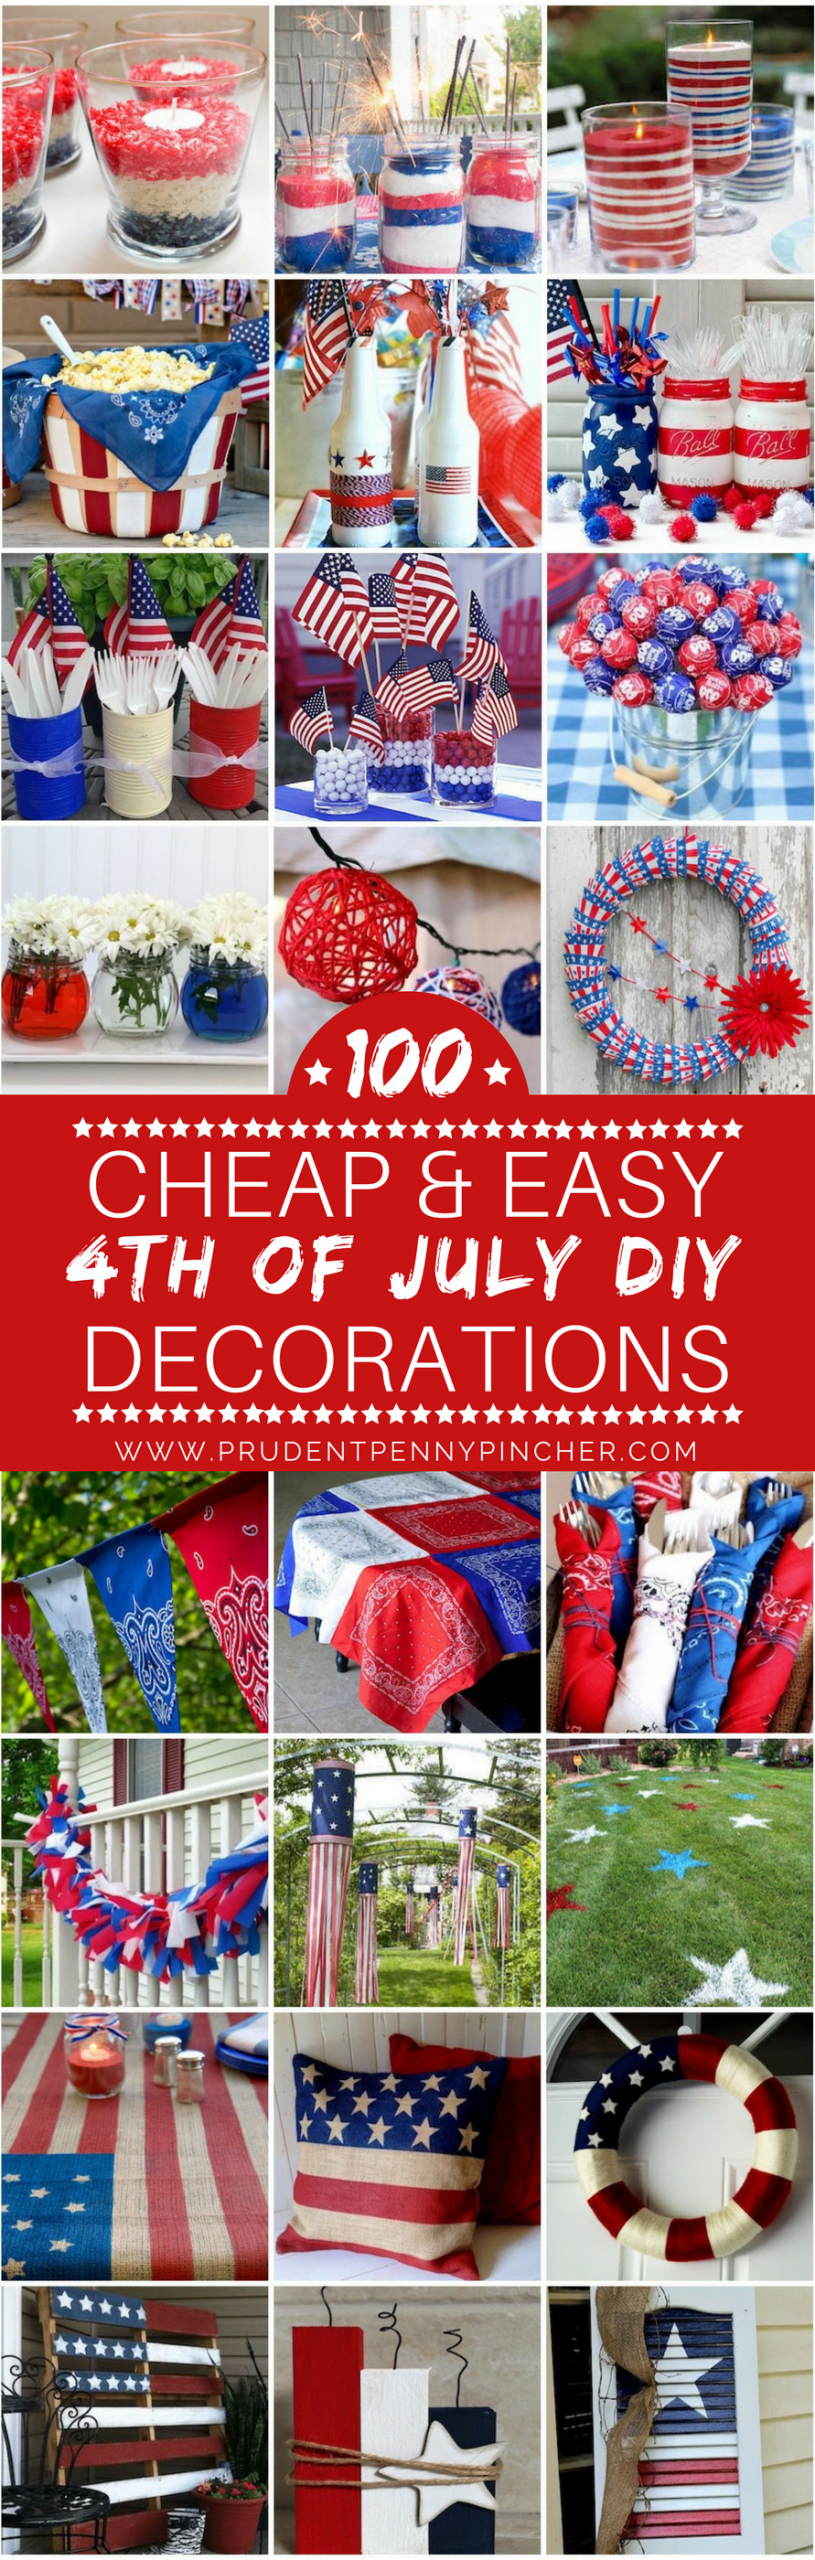 Diy Fourth Of July Decorations
 100 Cheap and Easy 4th of July DIY Party Decor Ideas